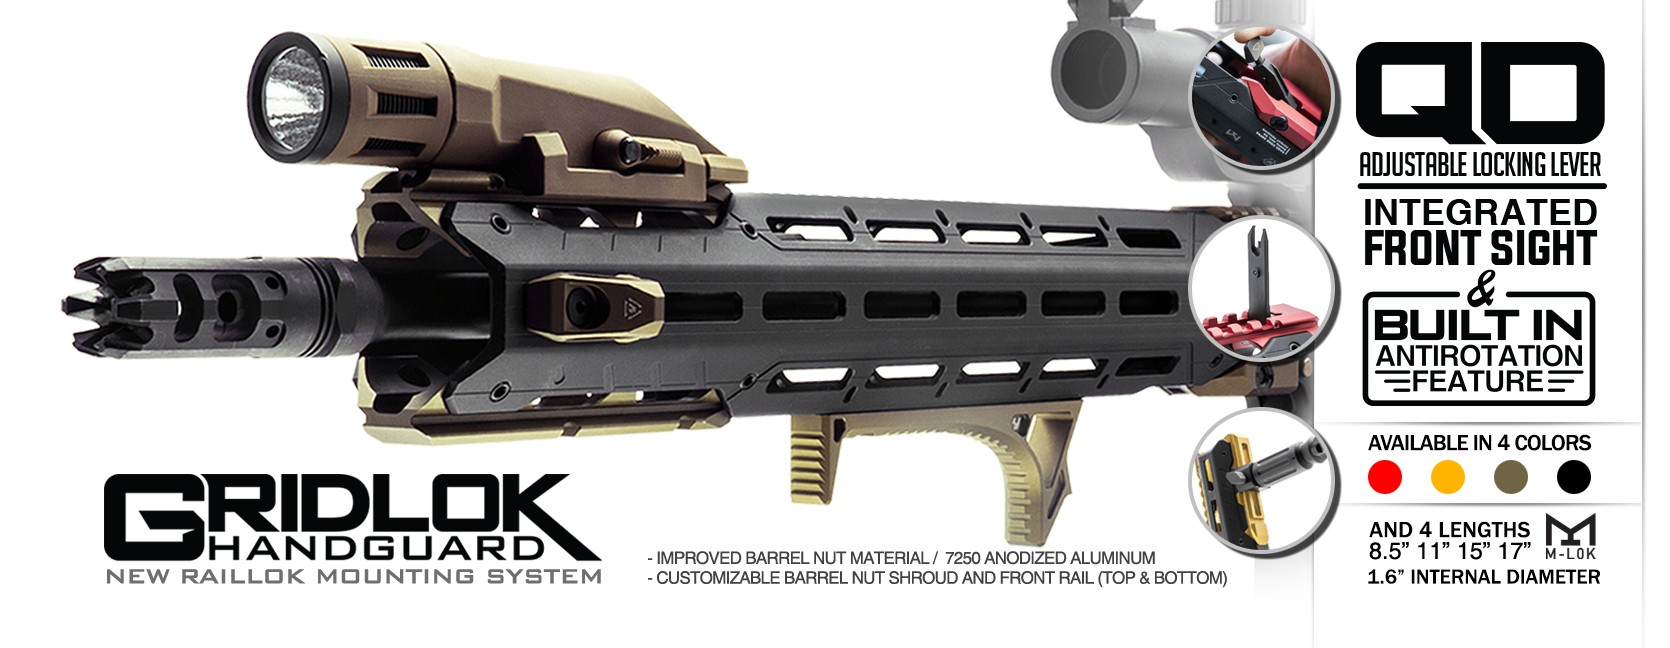 Strike Industries GridLok 15 Main Rail Body Only with Sights and rail attachment Black SI-GRIDLOK-HG-15-BK - R1 Tactical